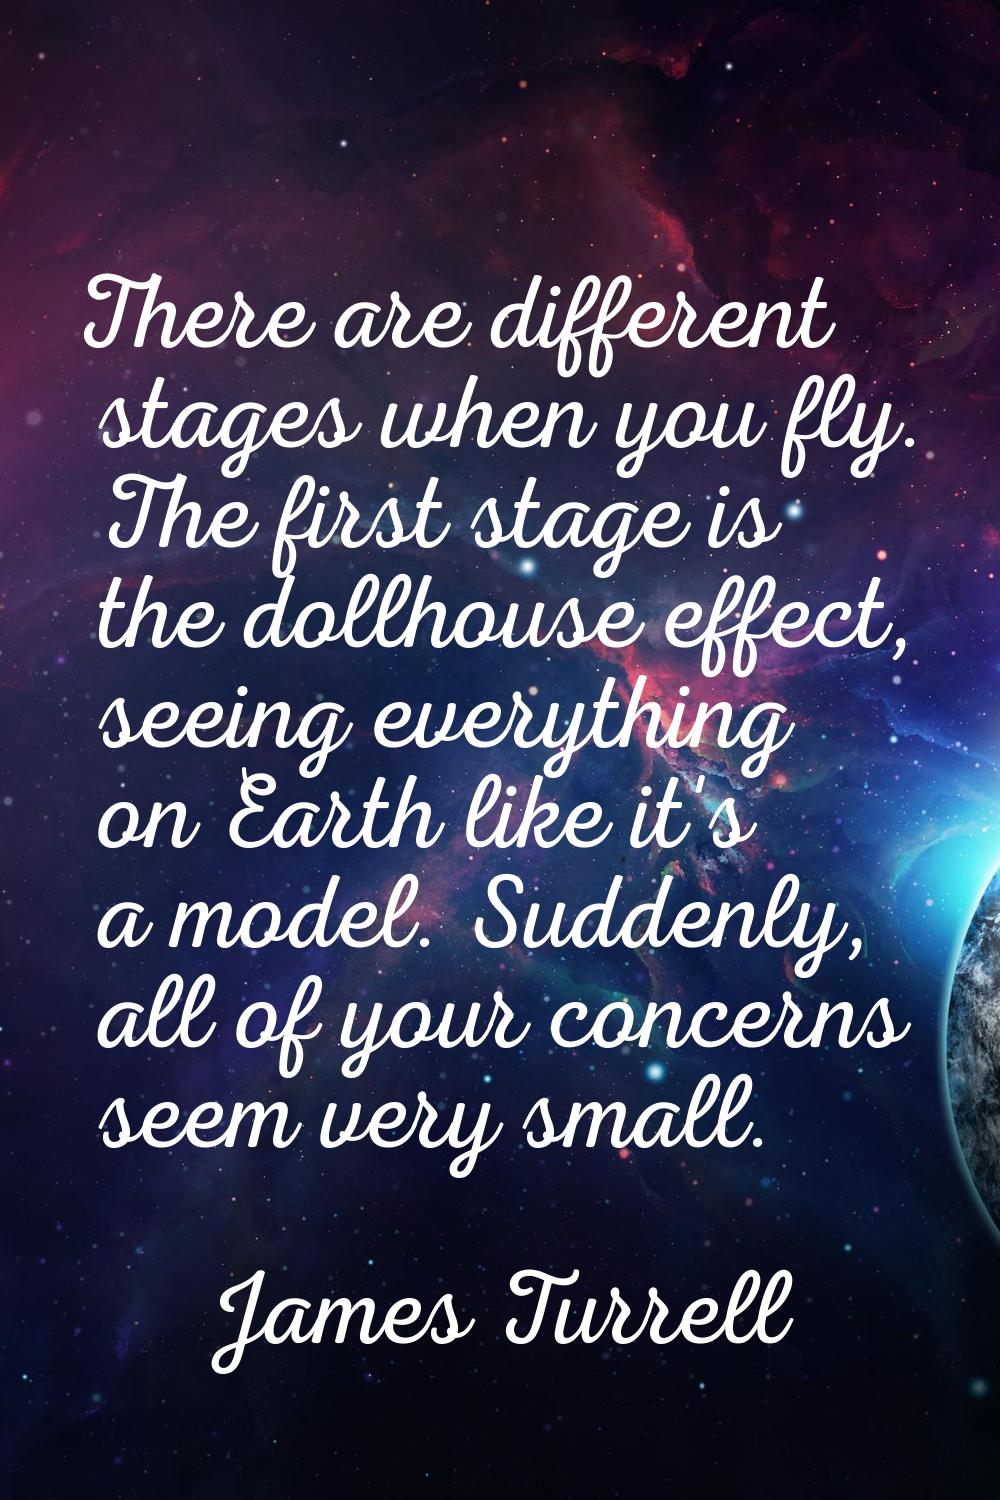 There are different stages when you fly. The first stage is the dollhouse effect, seeing everything